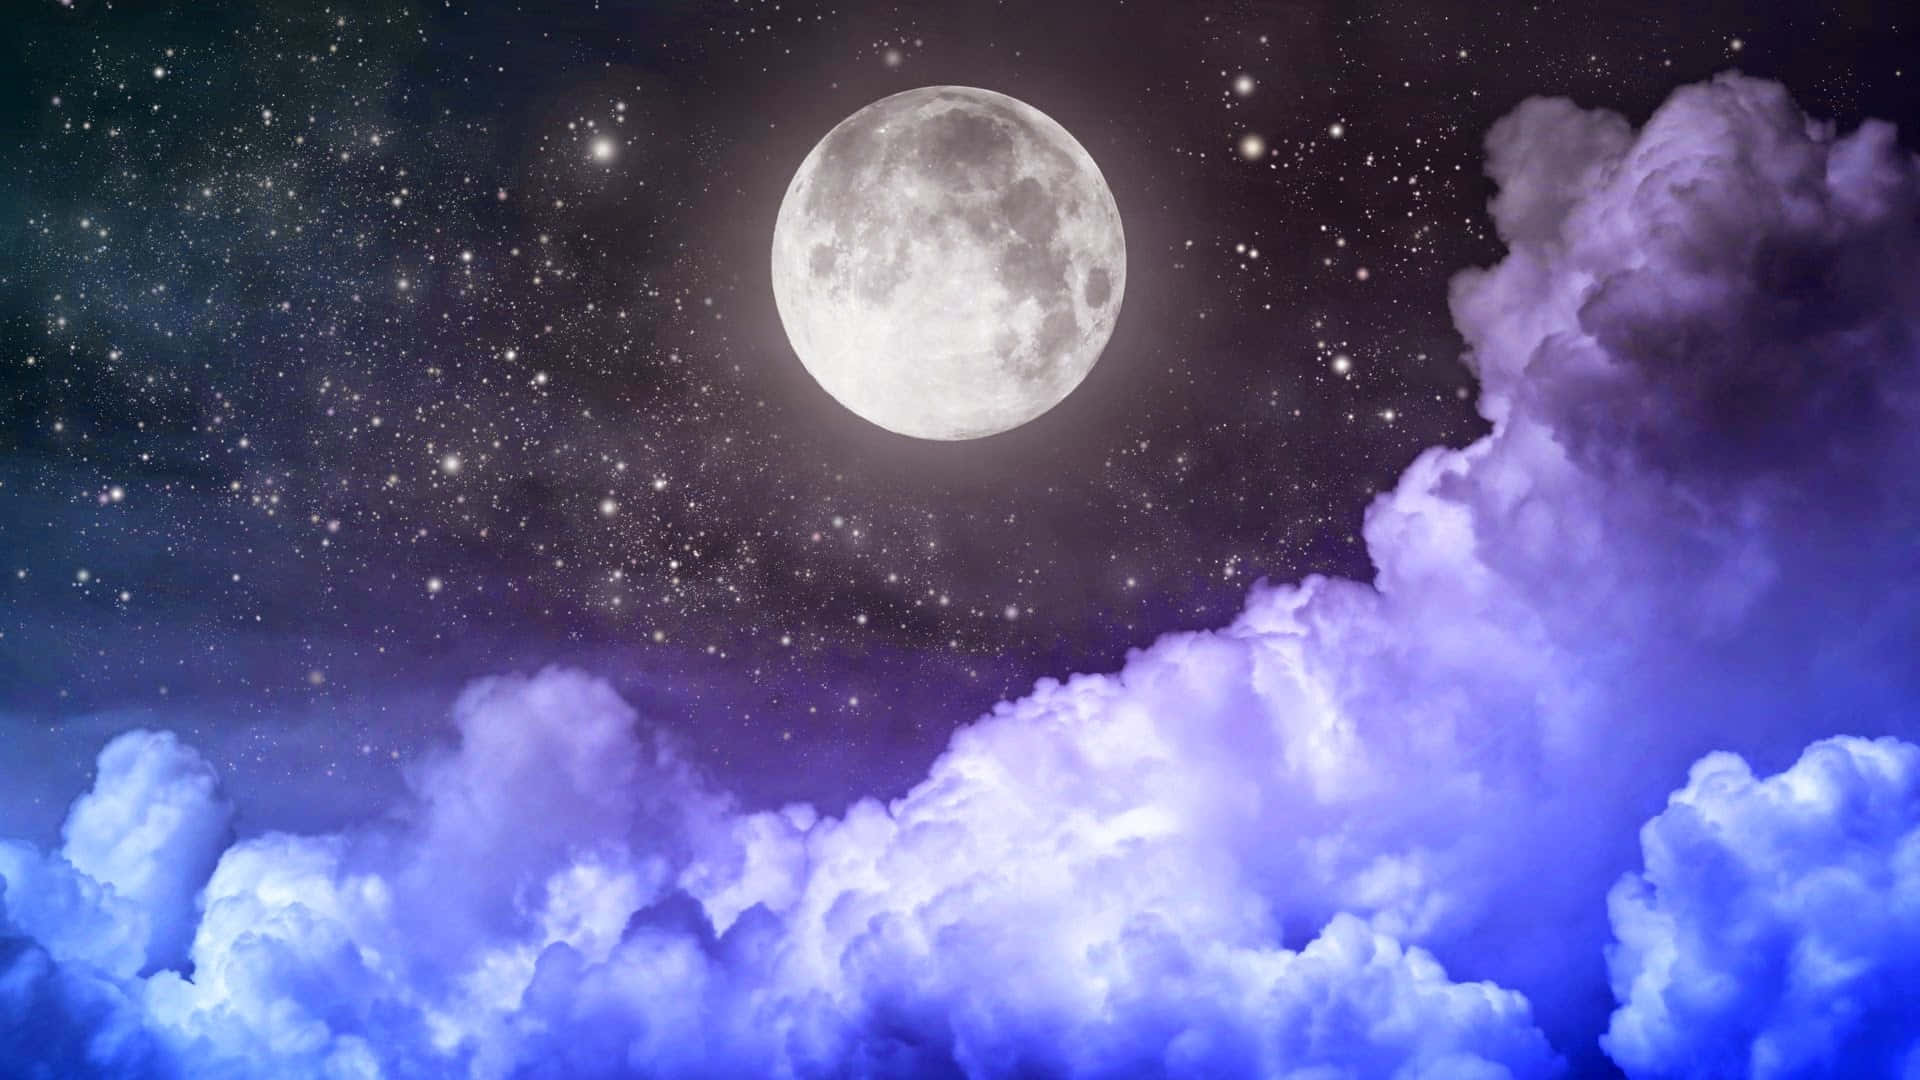 Stars And Moon Background